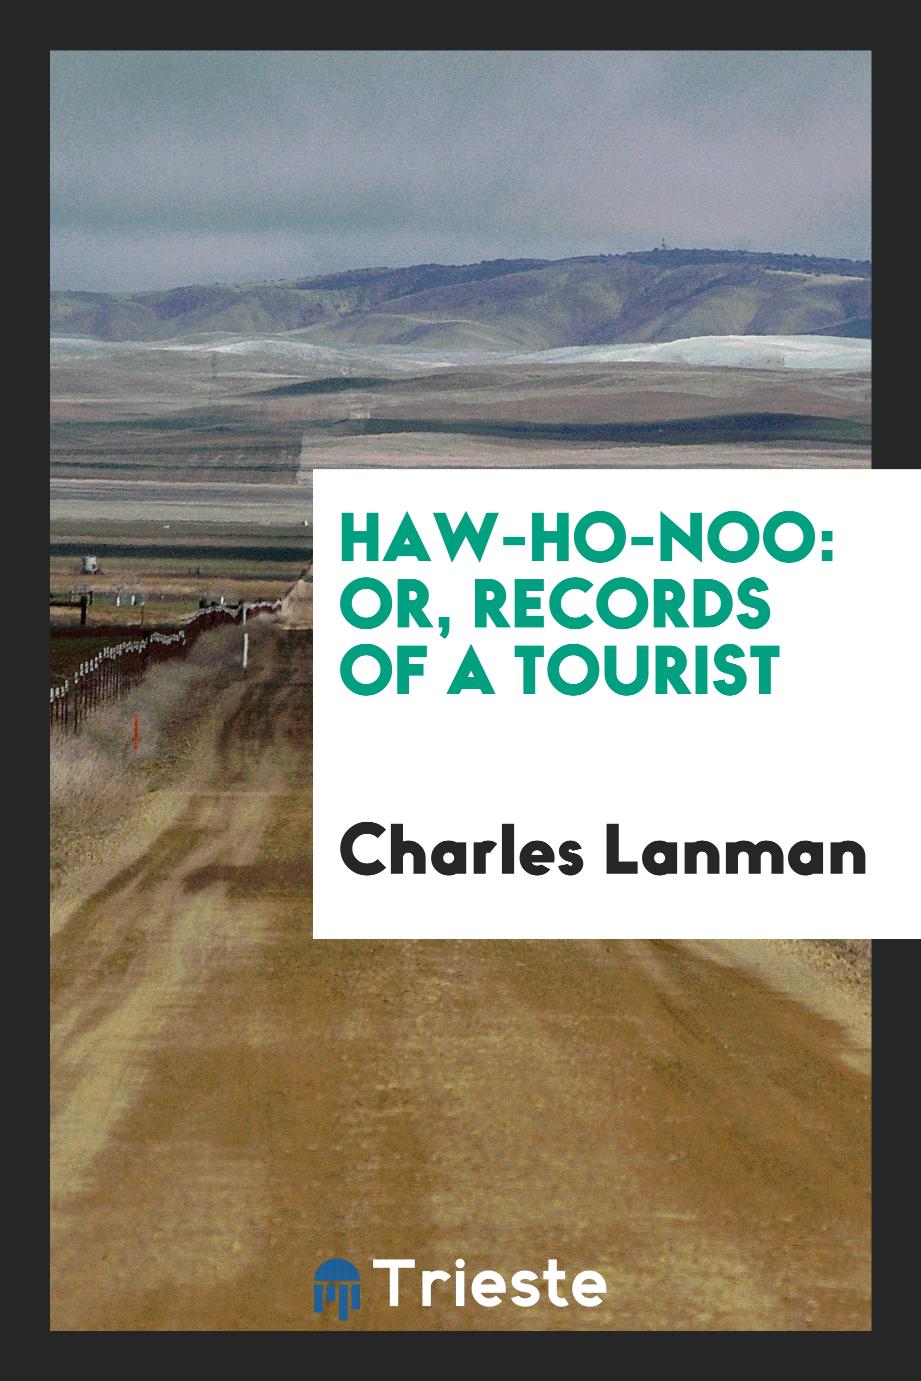 Haw-ho-noo: Or, Records of a Tourist